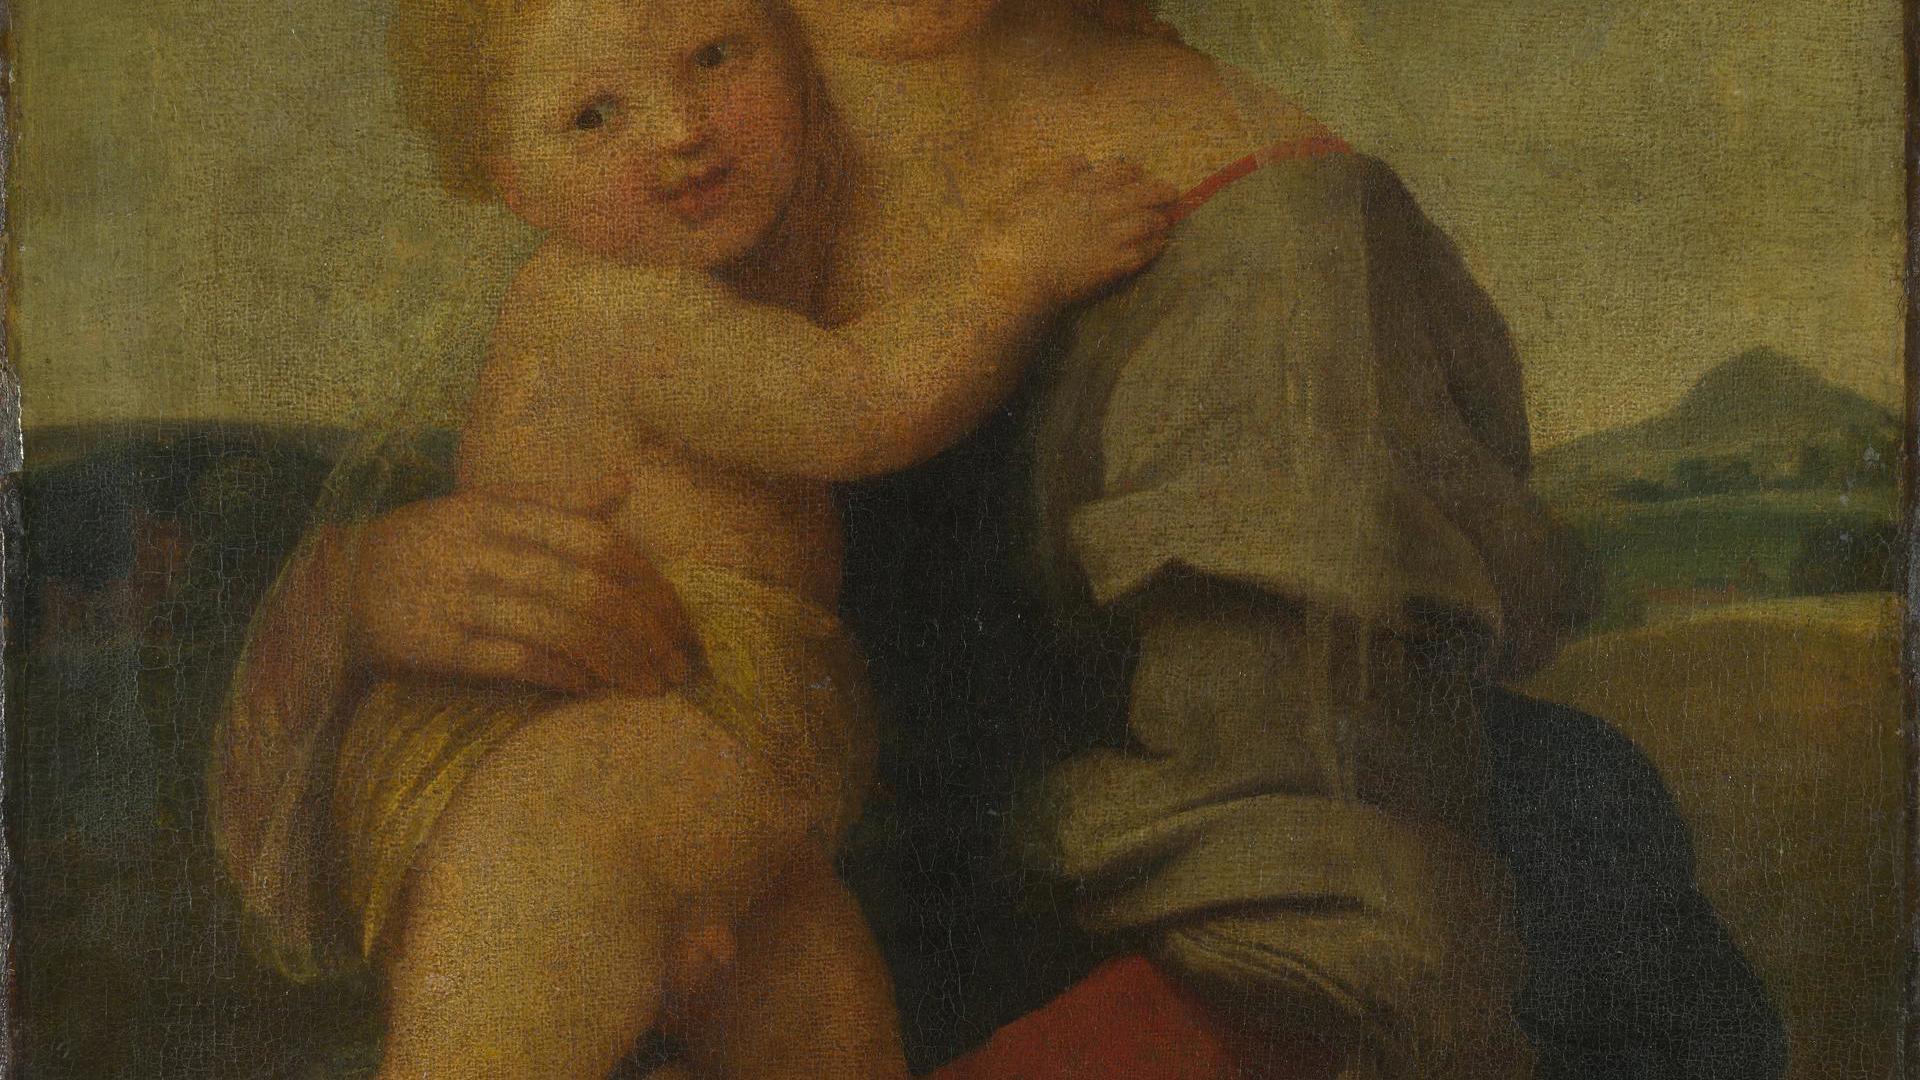 The Madonna and Child (The Mackintosh Madonna) by Raphael